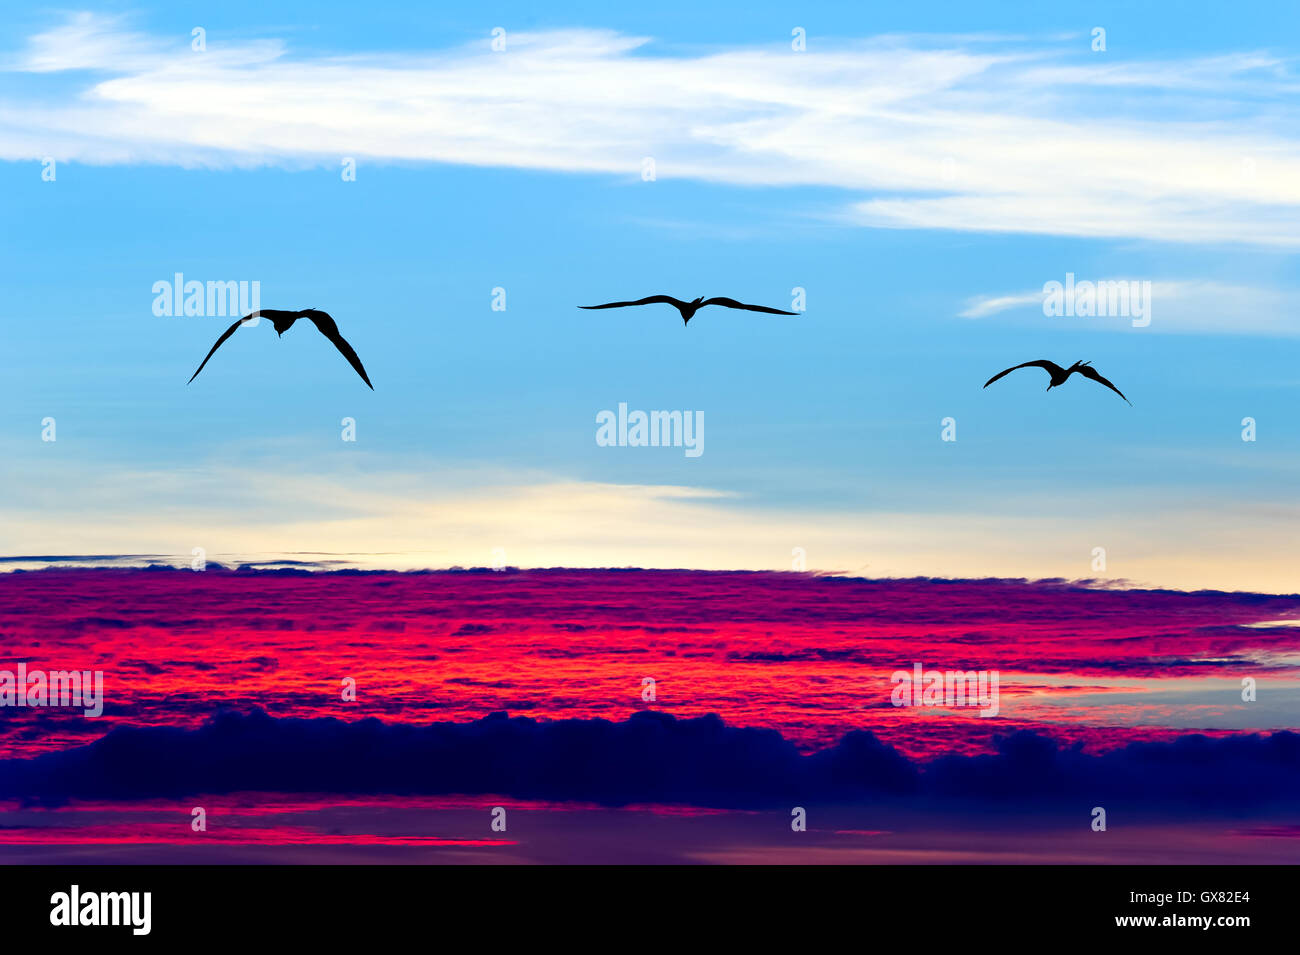 Birds flying silhouettes is three birds flying with wings spread soaring over a surreal ethereal blue sky cloudscape. Stock Photo